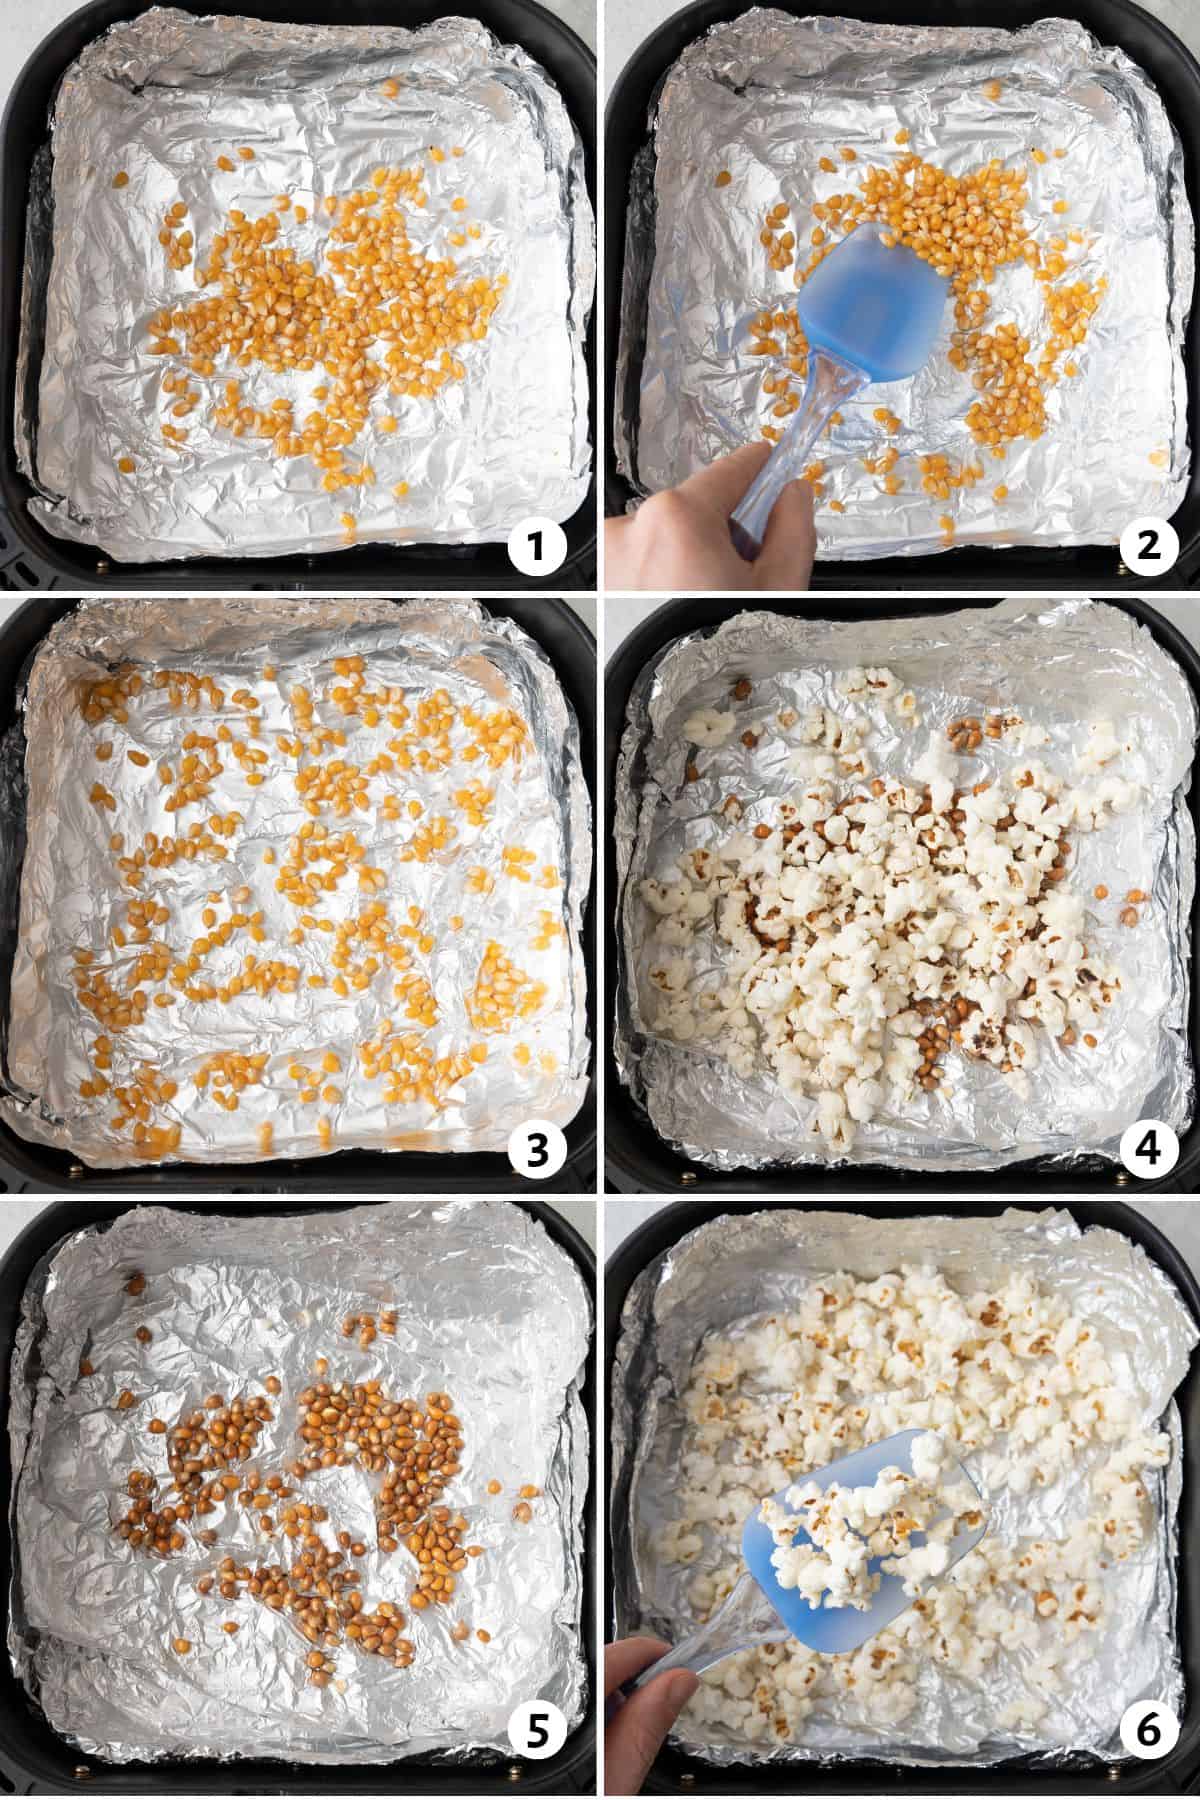 6 image collage making recipe in a foil lined air fryer basket: 1- kernals added with oil, 2- spoon tossing the oil and kernals, 3- popcorn kernels spread evenly on bottom of basket, 4-halfway through popping to show some popped and some not, 5- popped kernals removed with partially cooked left behind, 6- spoon removing remaining popcorn after cooking.